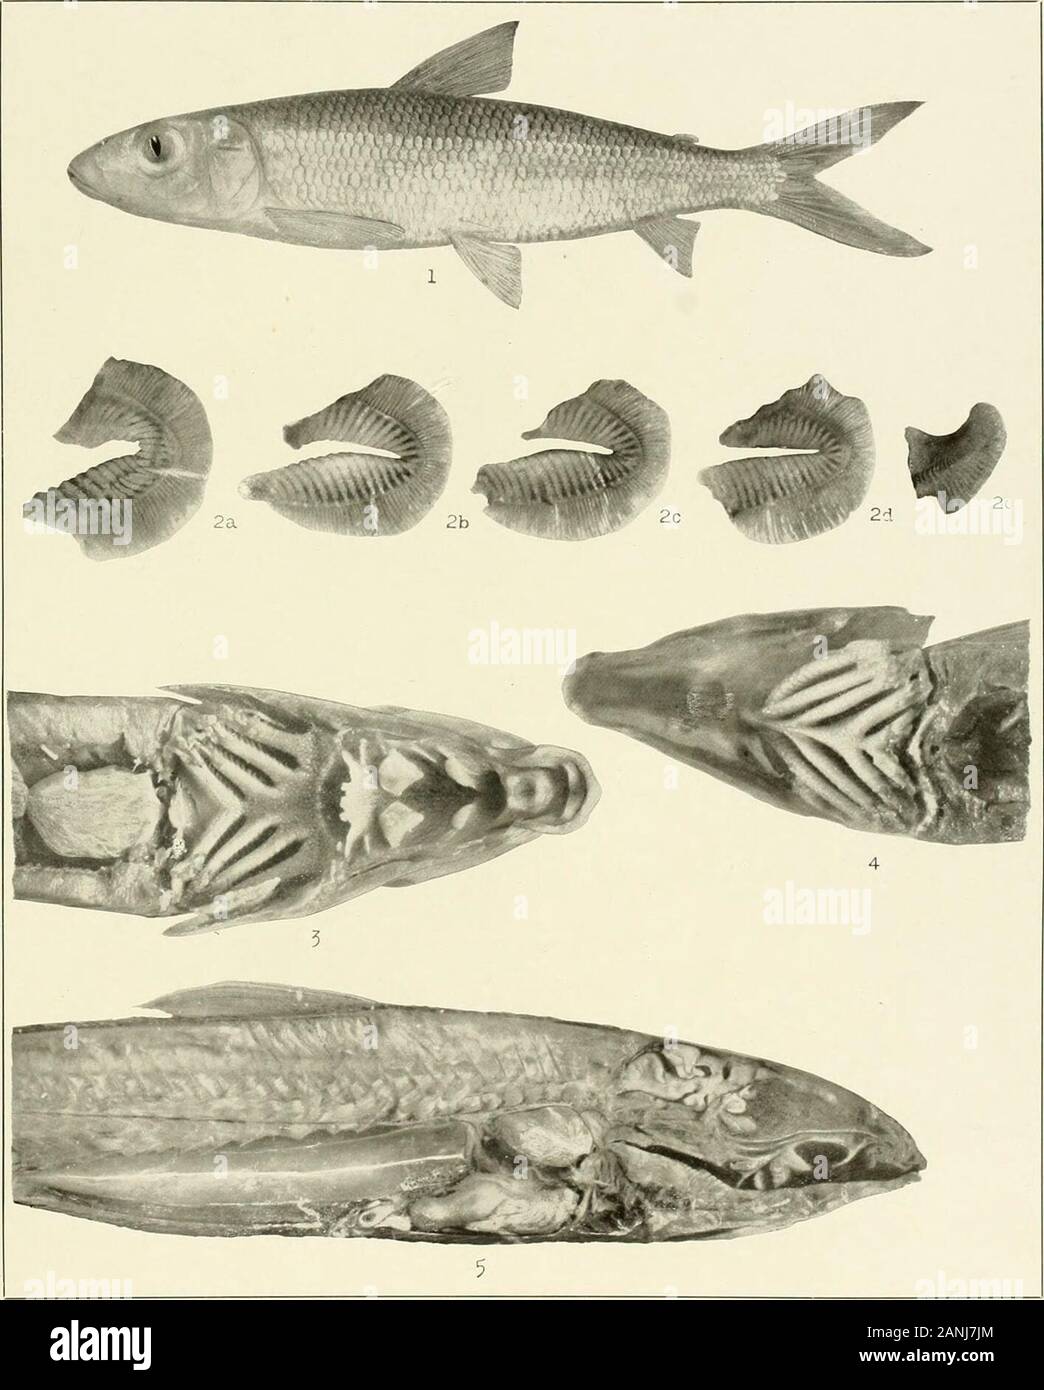 The freshwater fishes of British Guiana, including a study of the ecological grouping of species and the relation of the fauna of the plateau to that of the lowlands . 1. Loricariichthys microdot! Eigenmann. (Type.) 44 nun. to anus. No. 1507. 2. LoricariichthysgriseusEigenmann. (Type.) 731 mm. entire length. No. 1504. 3. Farlowellahargreavesi Eigenmann.(Type.) 170 mm. entire length. (Georgetown Museum.) Memoirs Carnegie Museum, Vol. V. Plate XXXlll.. 1. Bivibranchia protractila Eigenmann. (Type.) 115 mm. No. 1873. 2a-2e. Gills of left side, begin-ning with the first at 2a. 3. Roof of mouth and Stock Photo